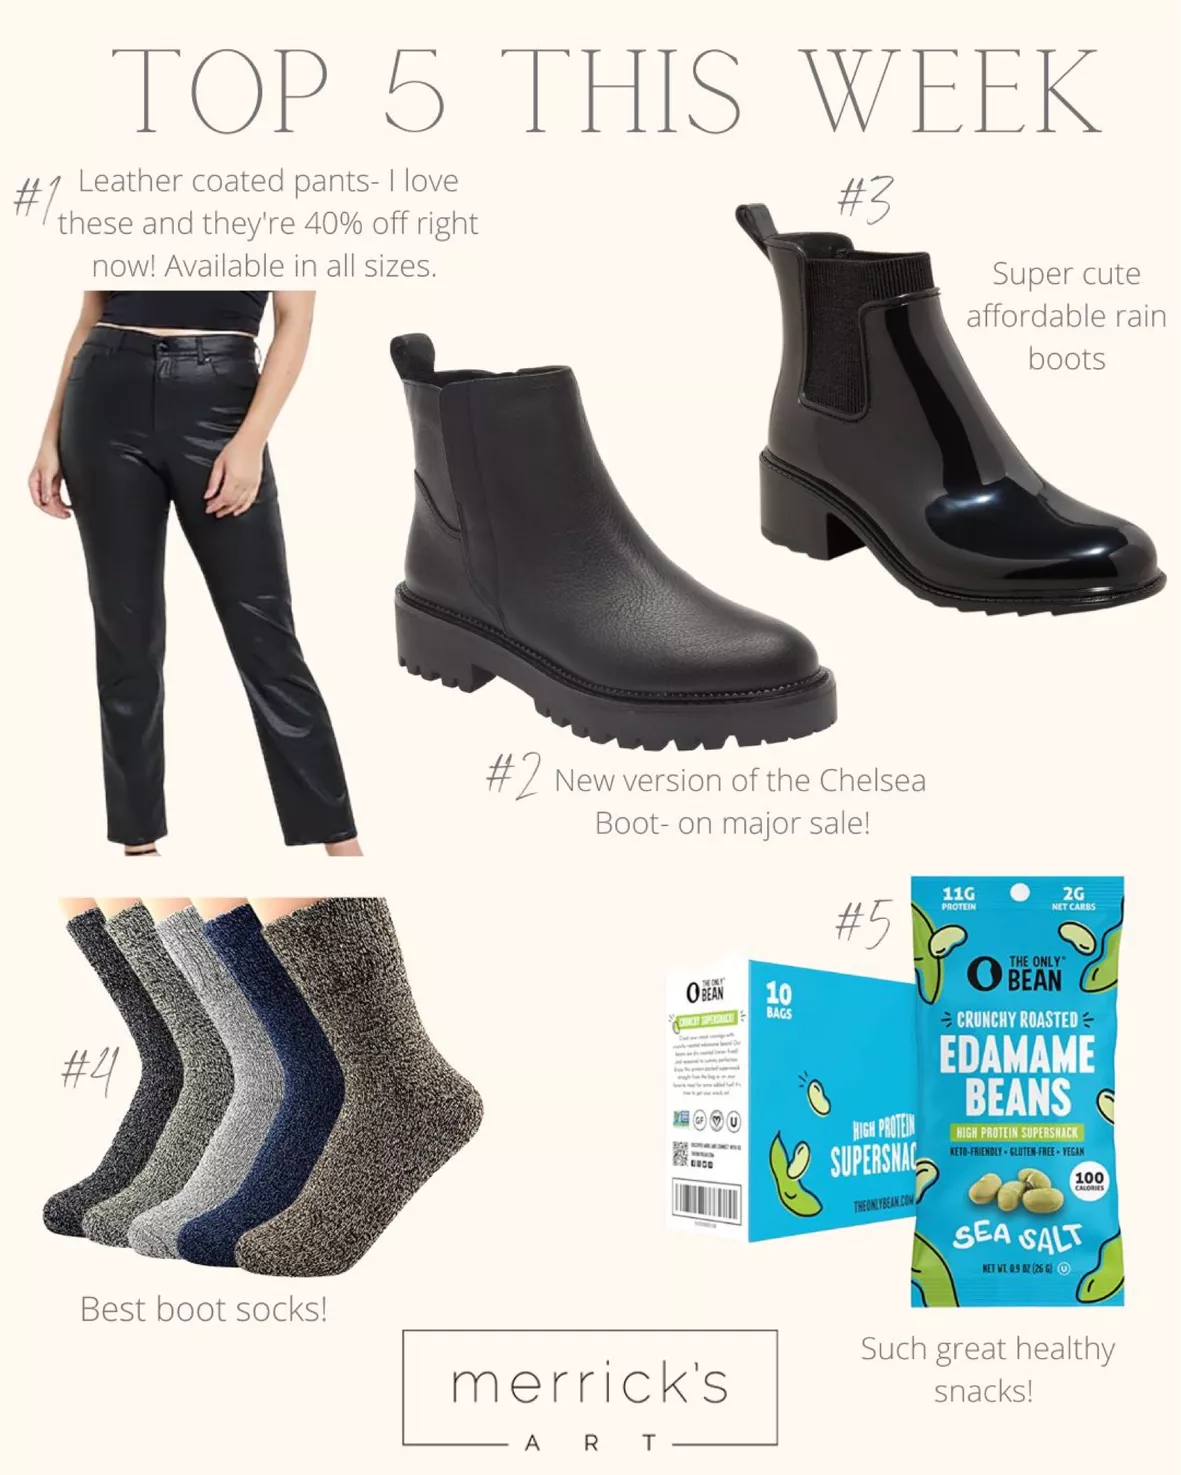 How to Wear Tall Socks with Boots - Merrick's Art